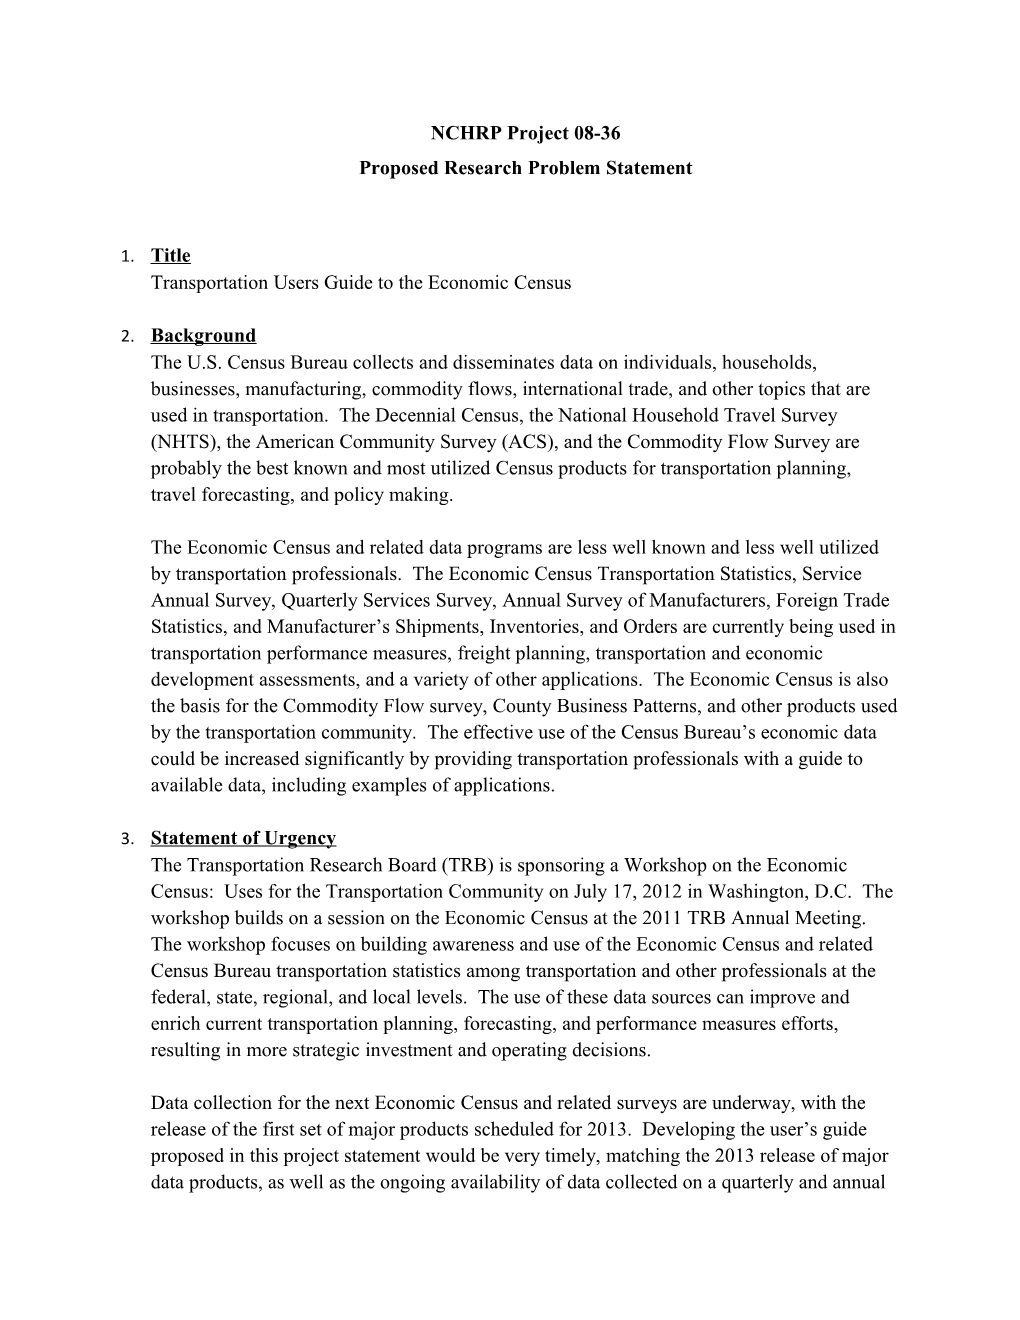 Proposed Research Problem Statement